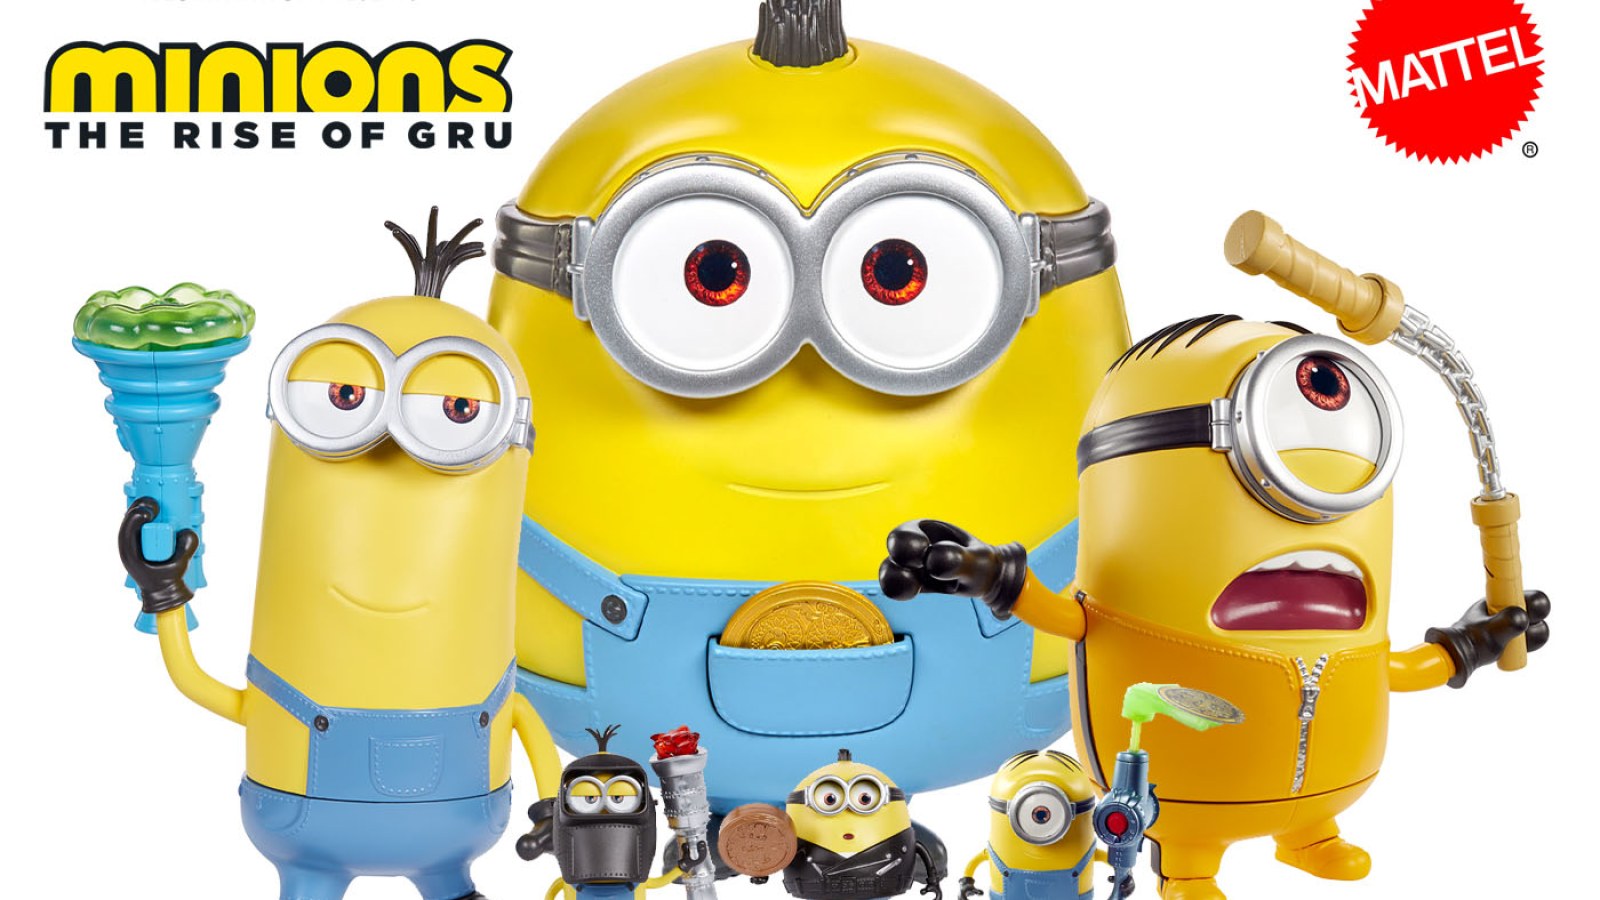 Exclusive Minions The Rise Of Gru Toys Releasing From Mattel In Spring